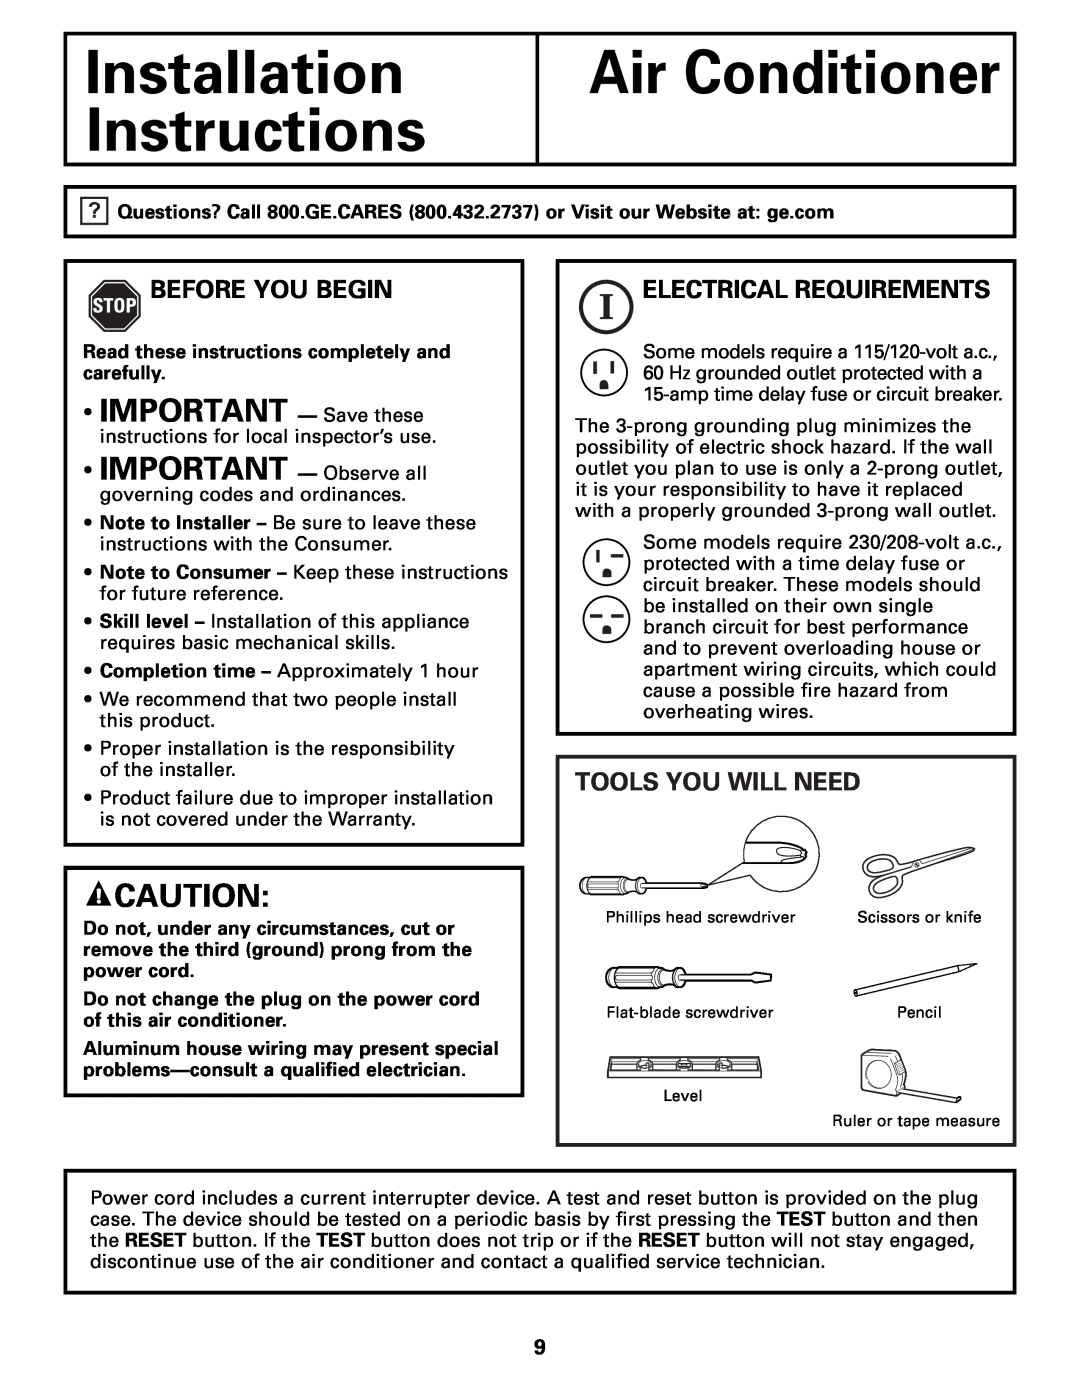 GE AGM05 Installation Instructions, Air Conditioner, IMPORTANT - Save these, Before You Begin, Electrical Requirements 